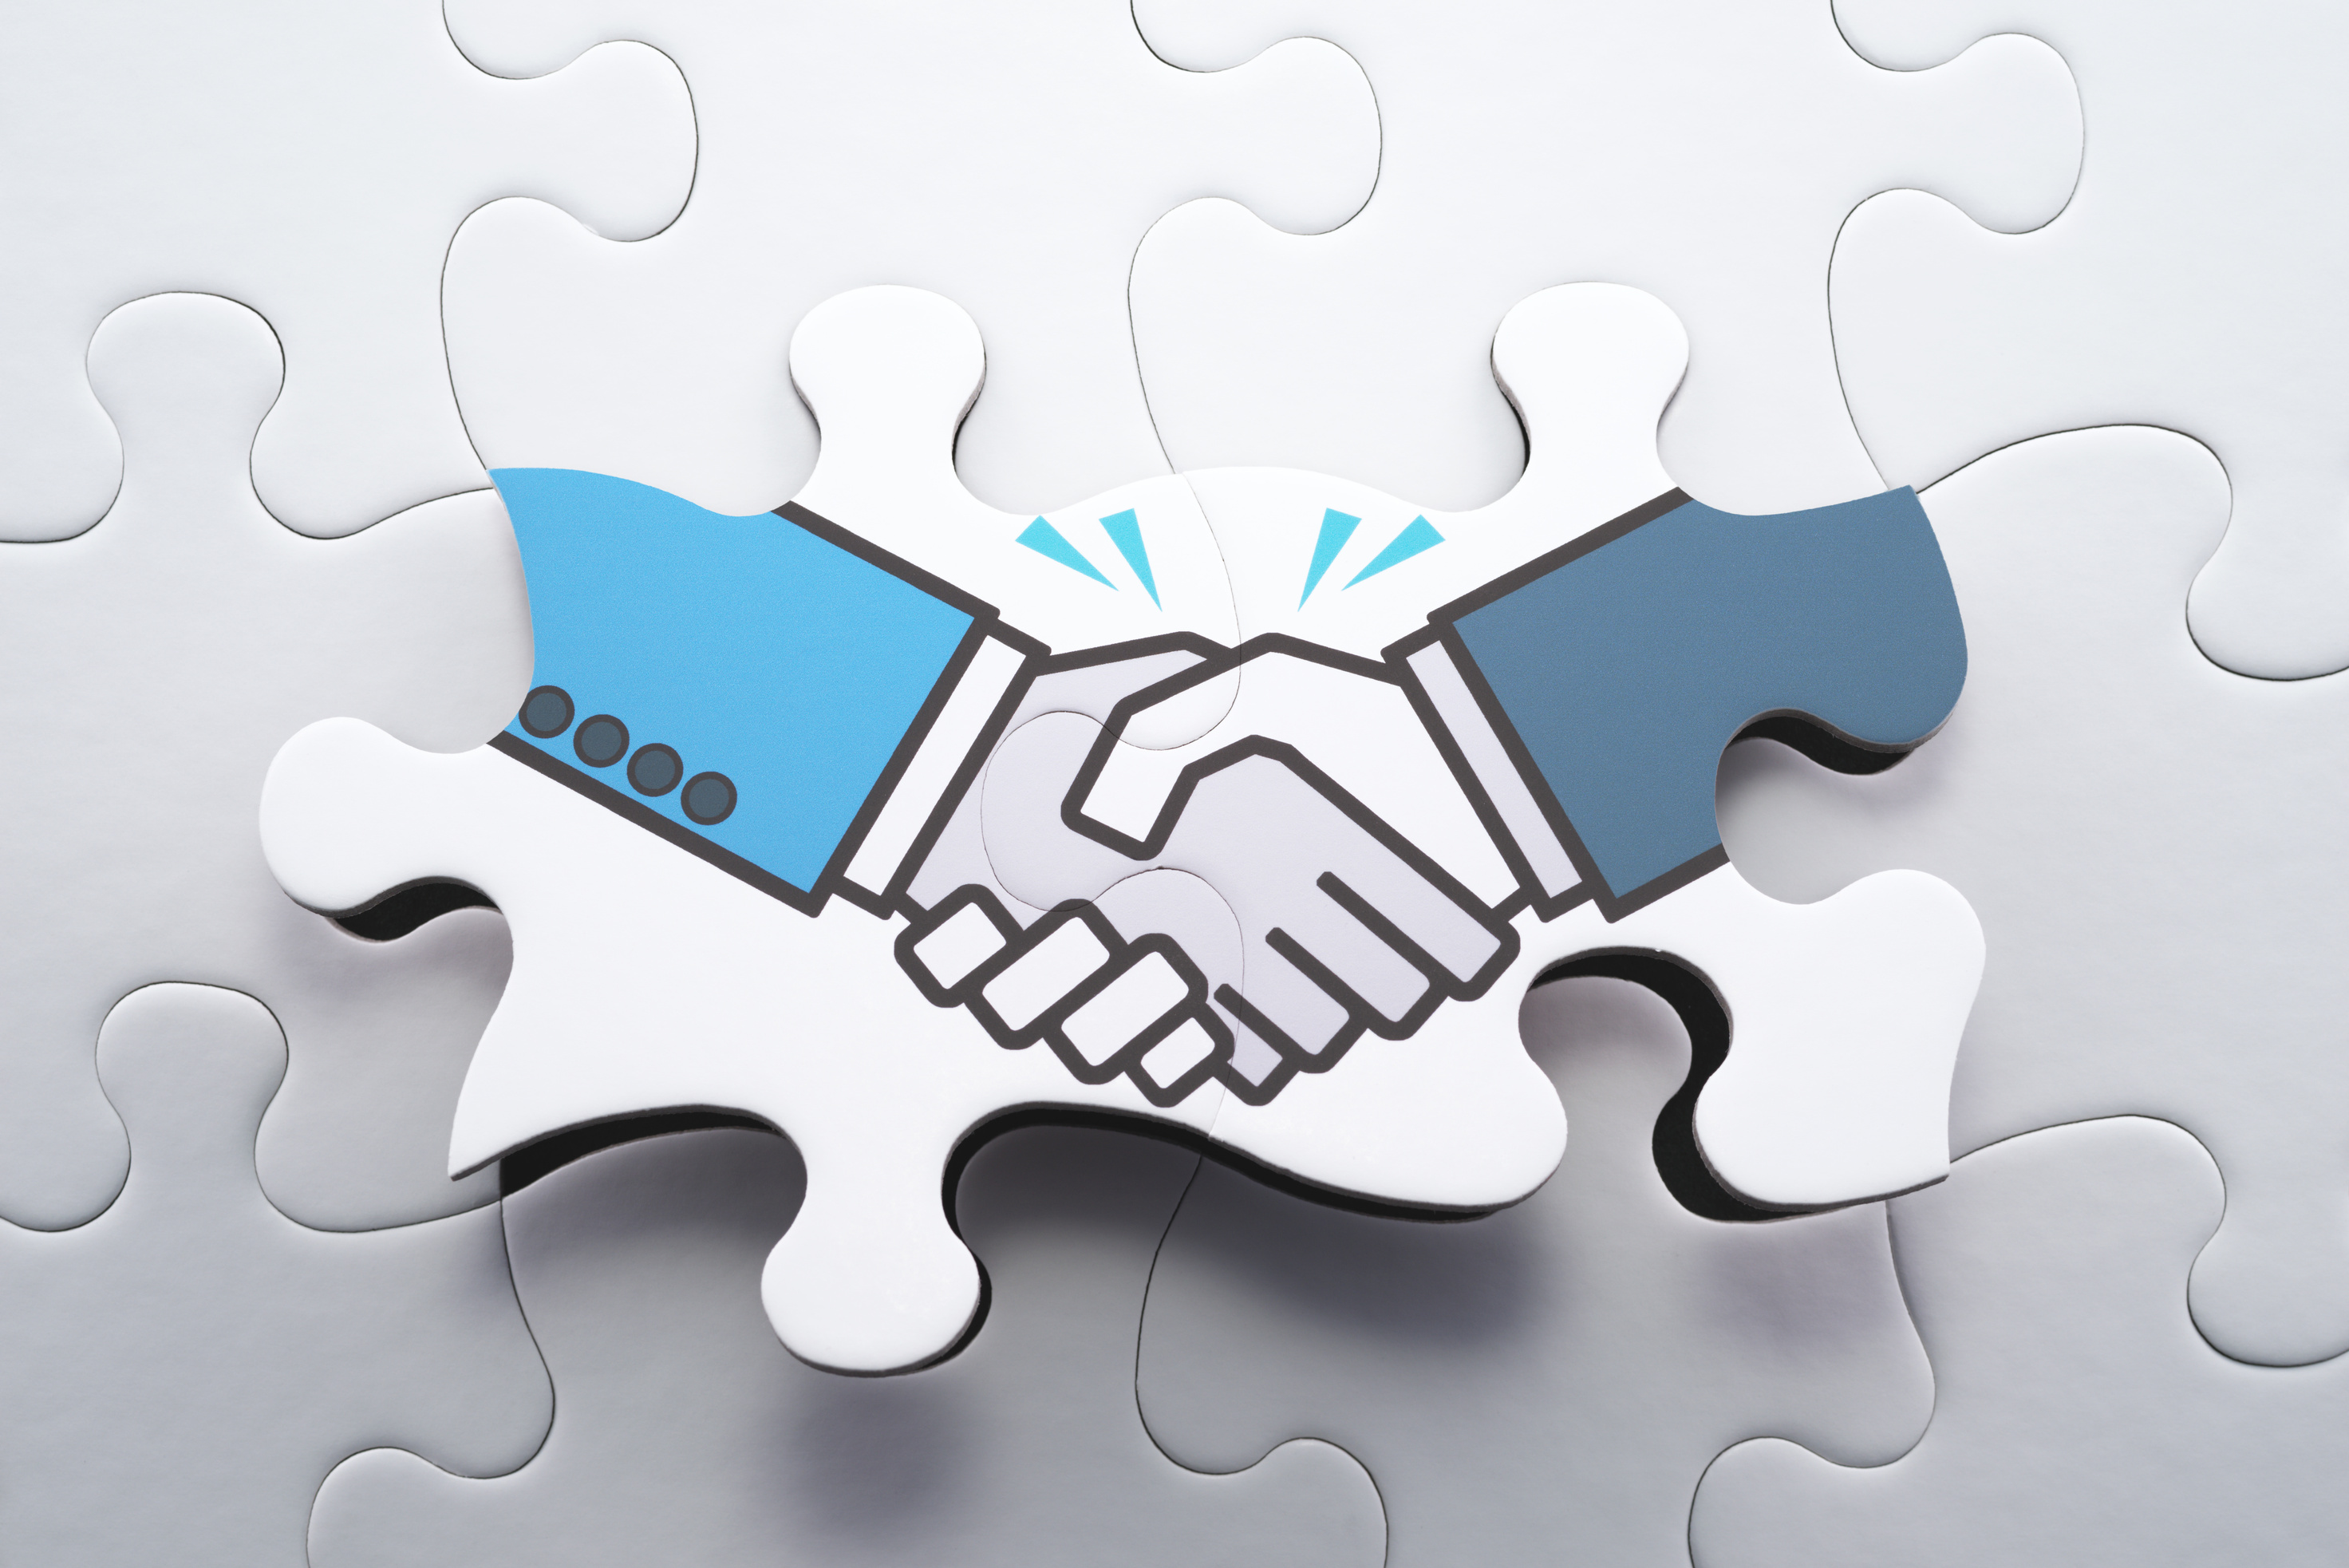 Agreement, consensus building and strategic partnership concept.